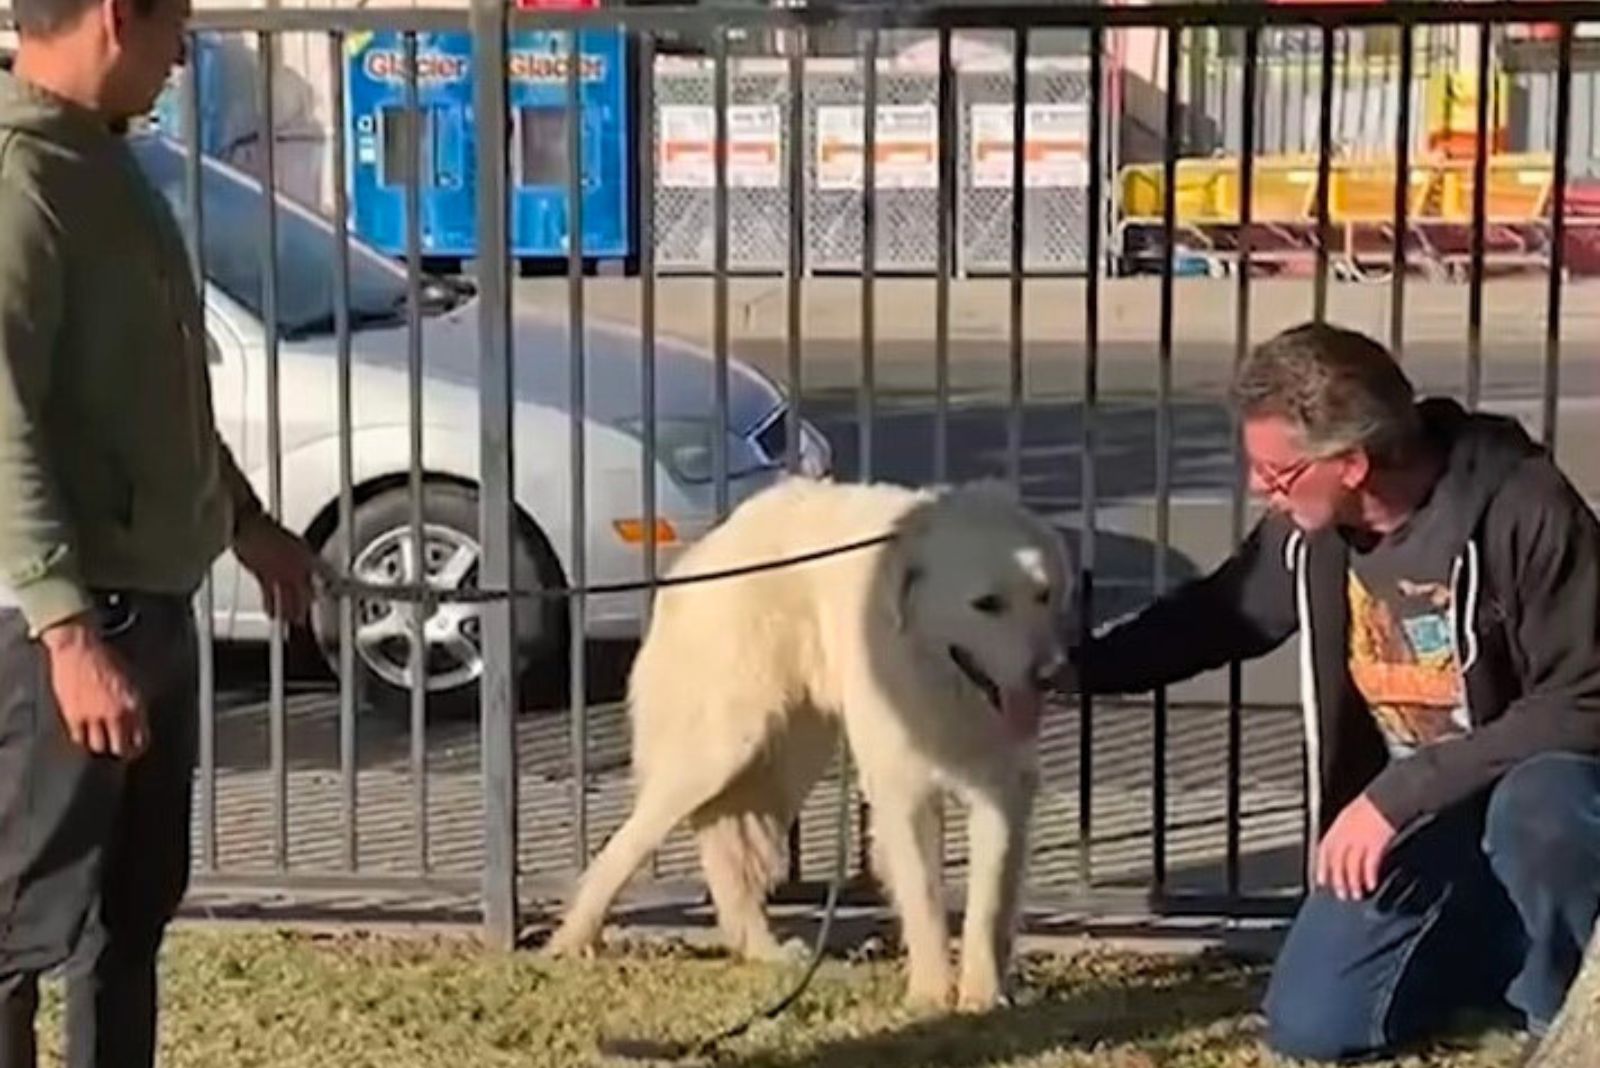 a dog on a leash while a man is petting it